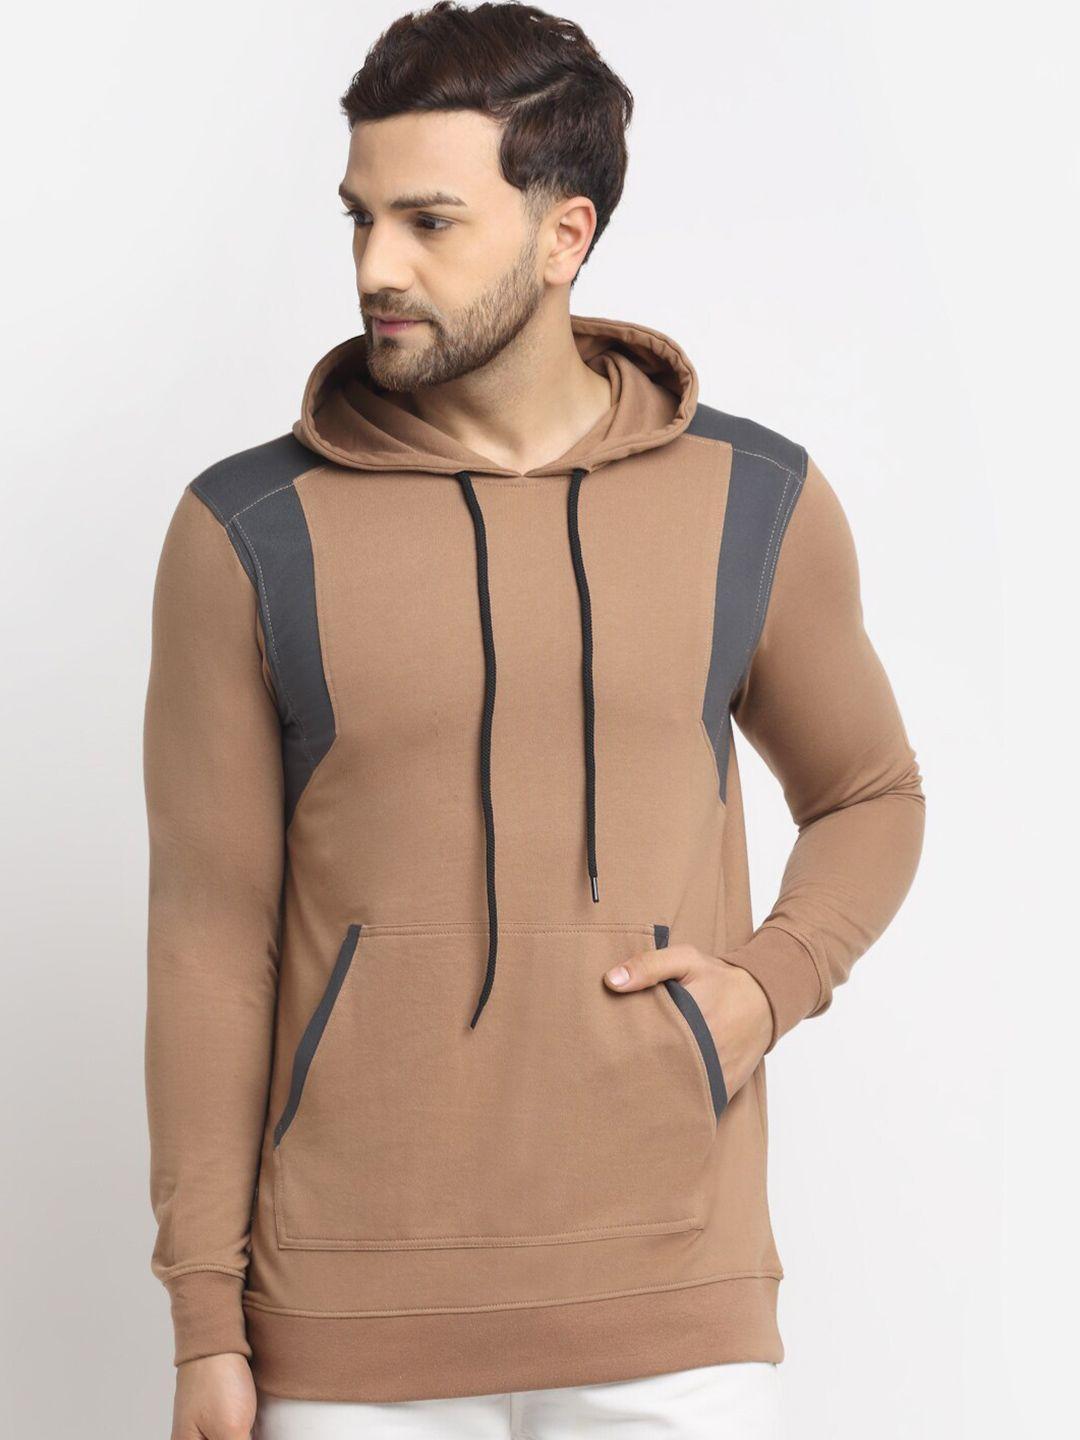 house of vedas hooded long sleeves fleece pullover